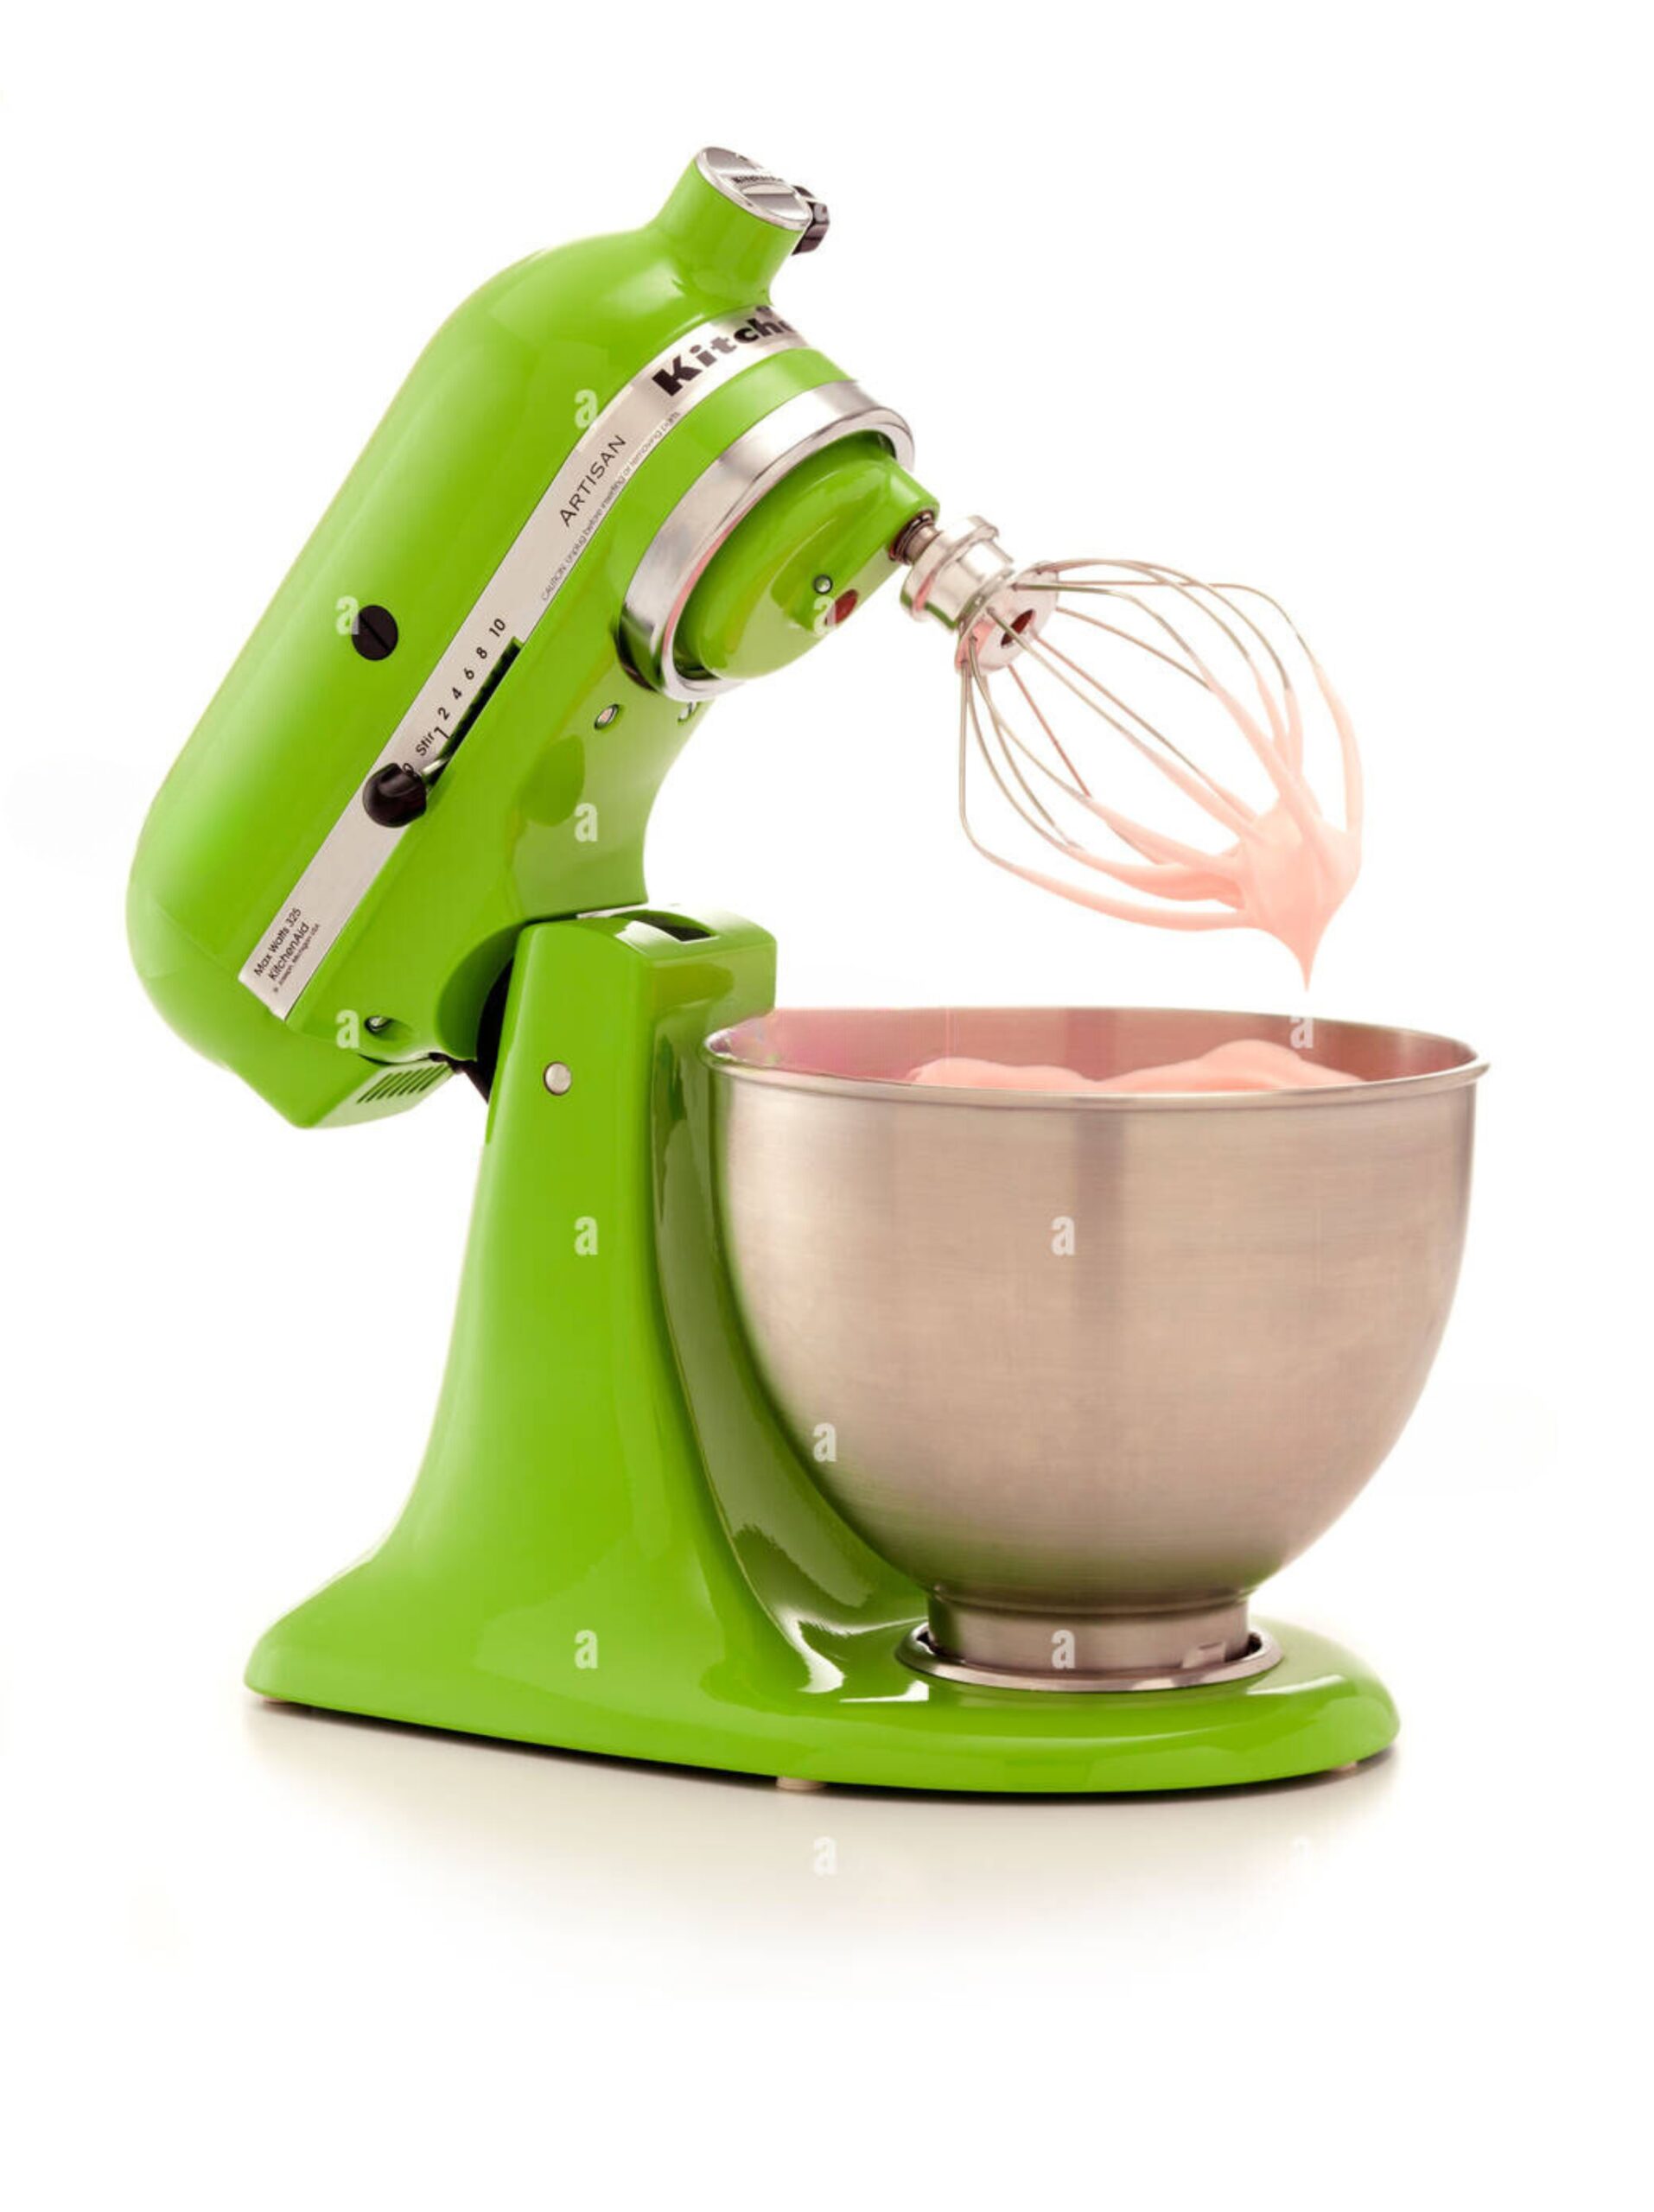 Perfect KitchenAid Mixer for Home Use